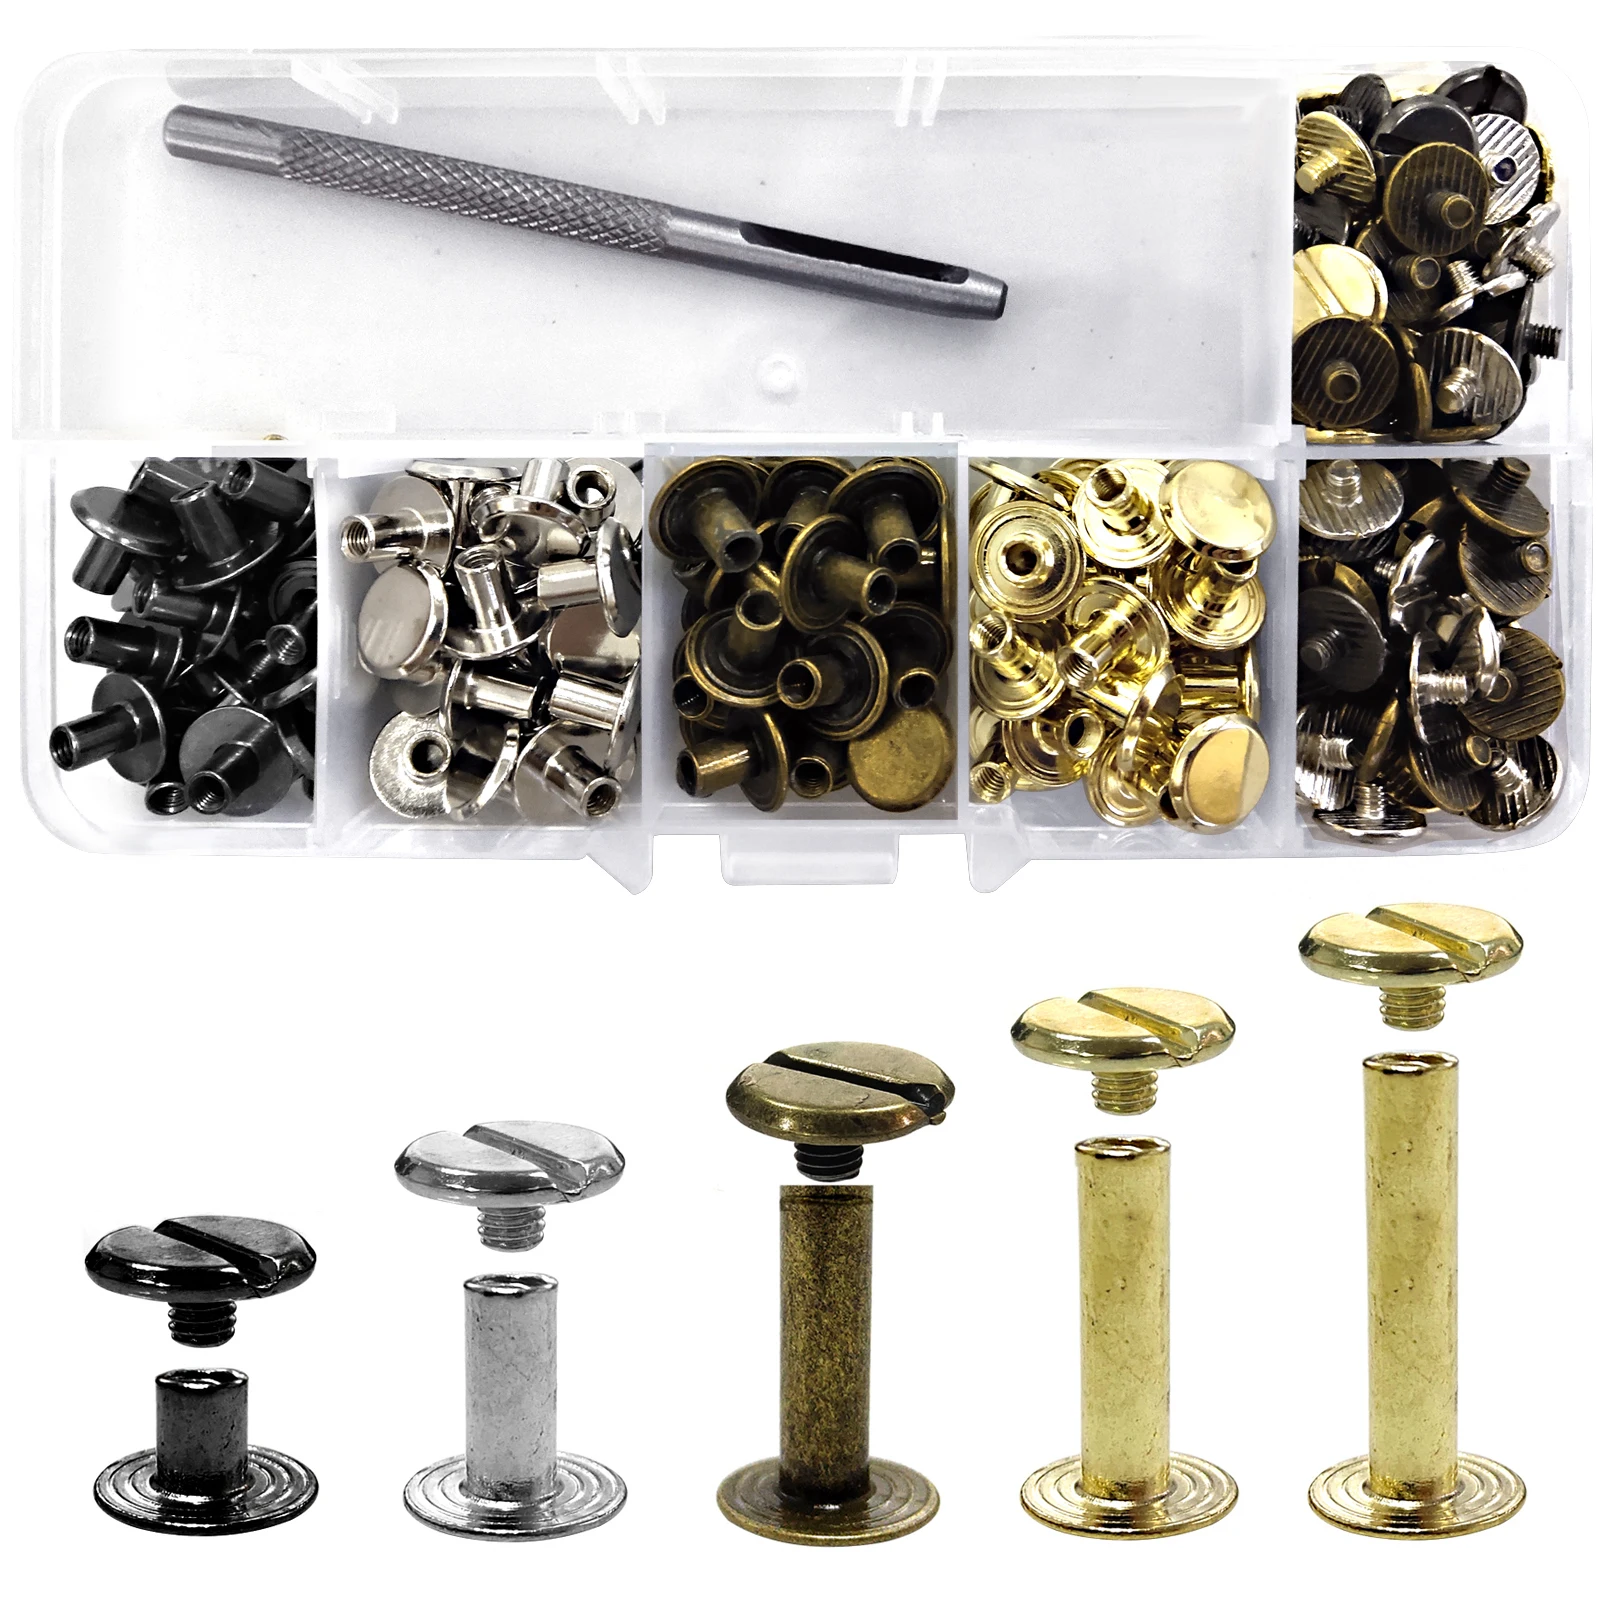 Leather Craft Kits Chicago Screws Solid Round Head Nail Studs Rivets Bolt For Luggage Clothes Bag Strap Shoes Belt Decorations